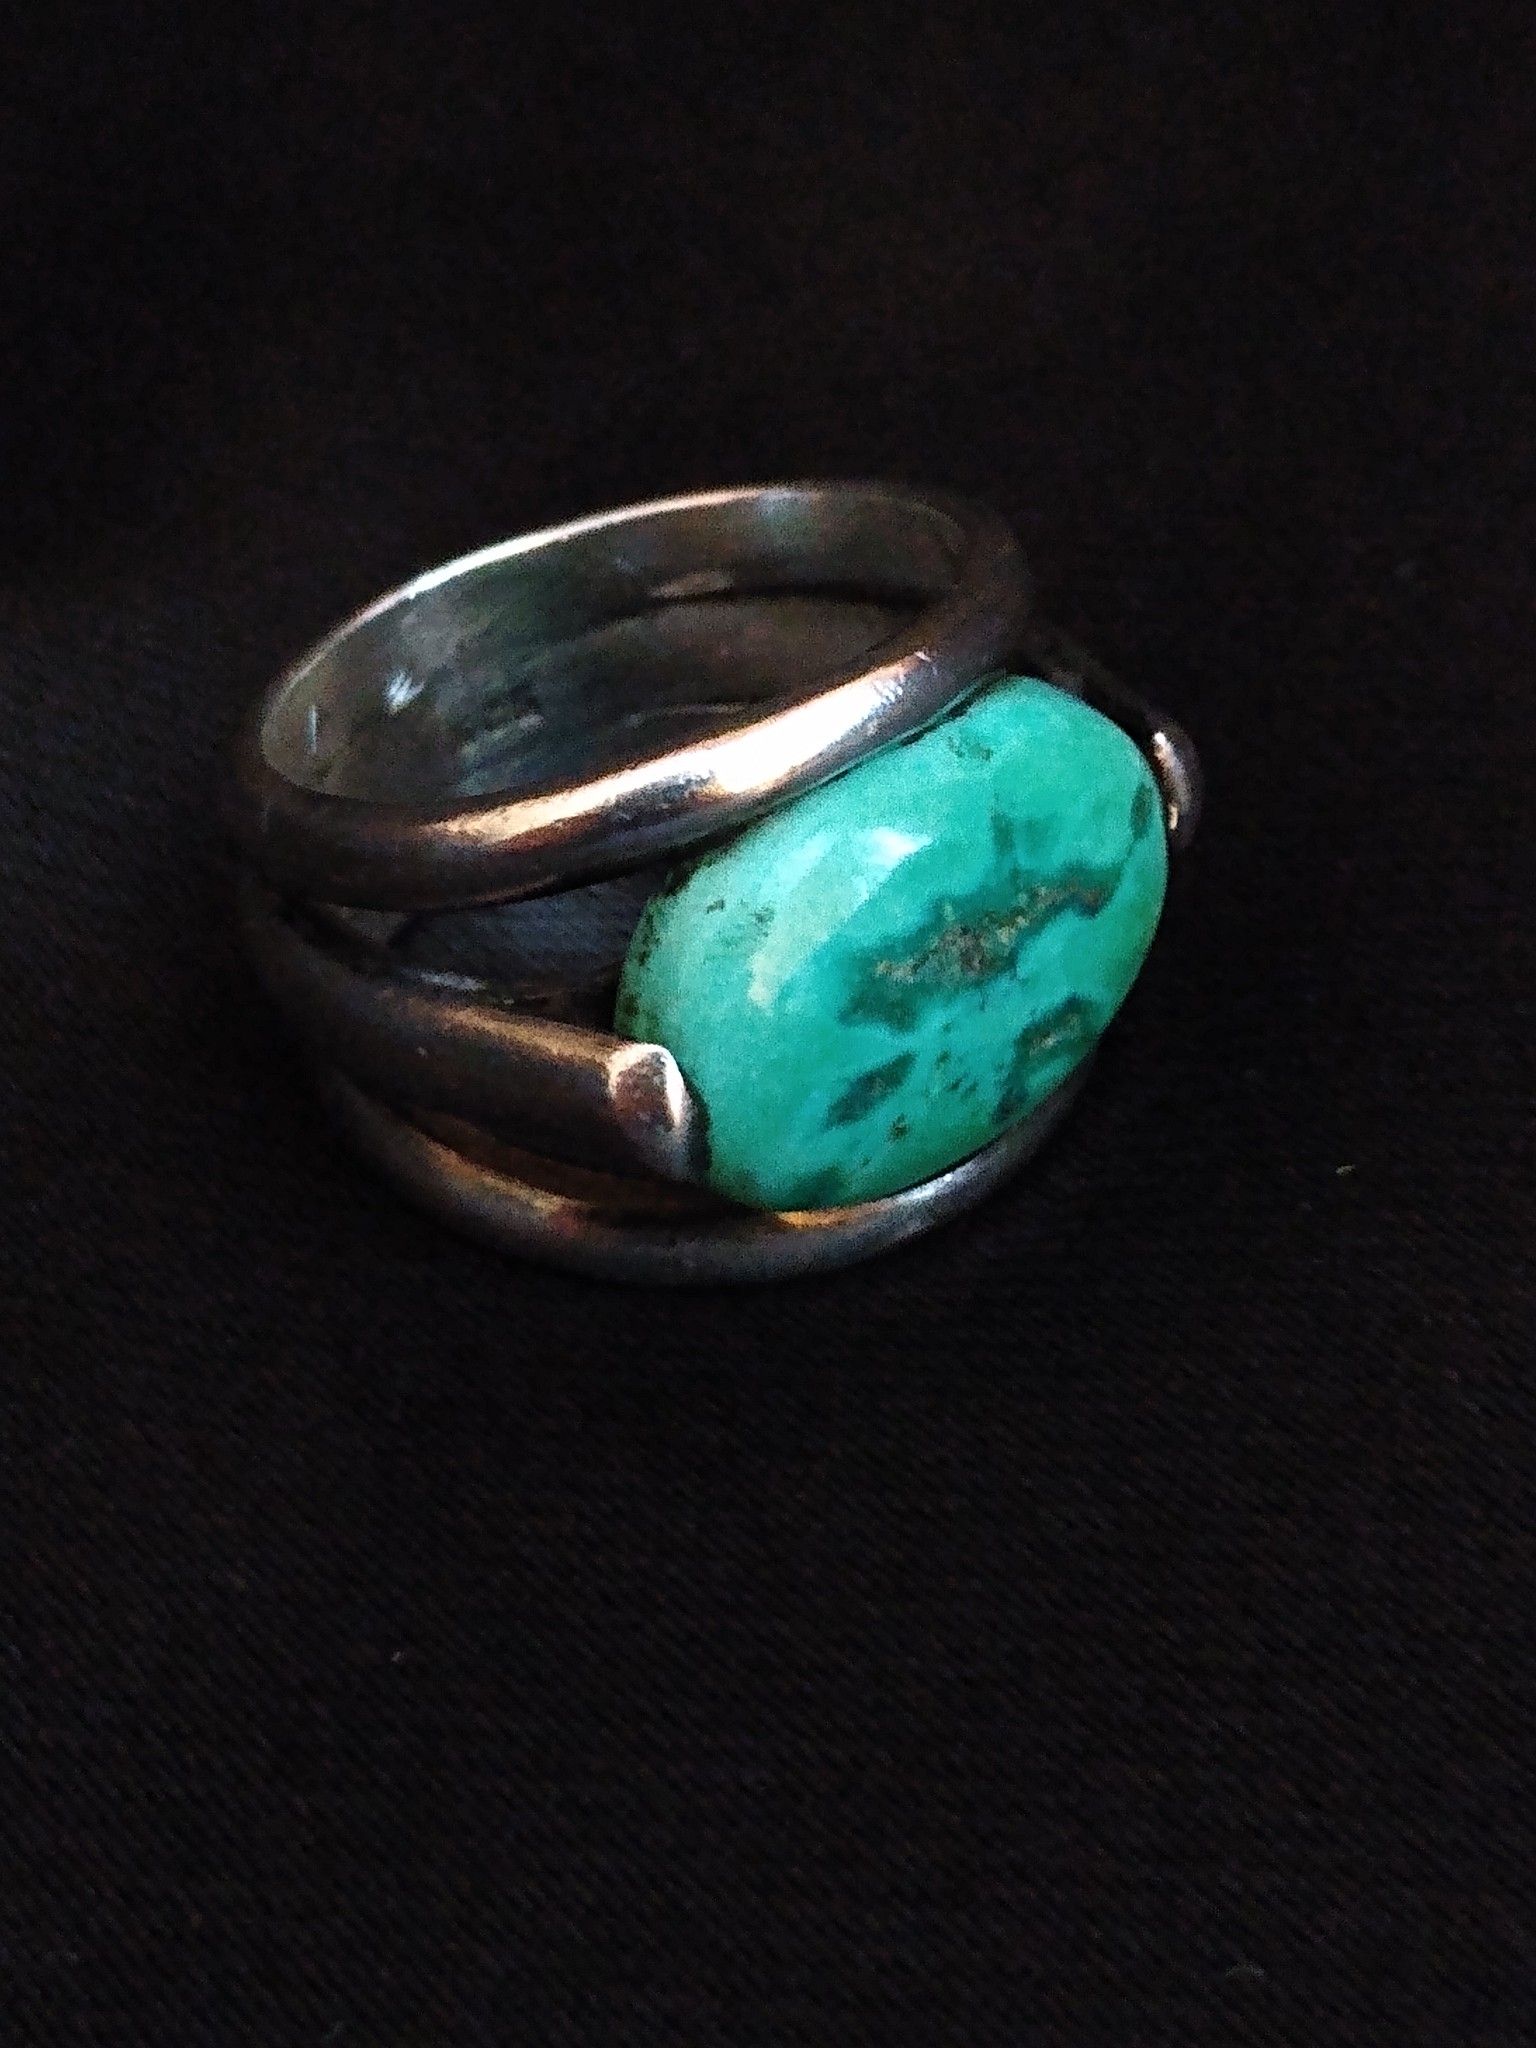 Seafoam green and blue natural turquoise sterling silver ring (size 10.25 unisex)